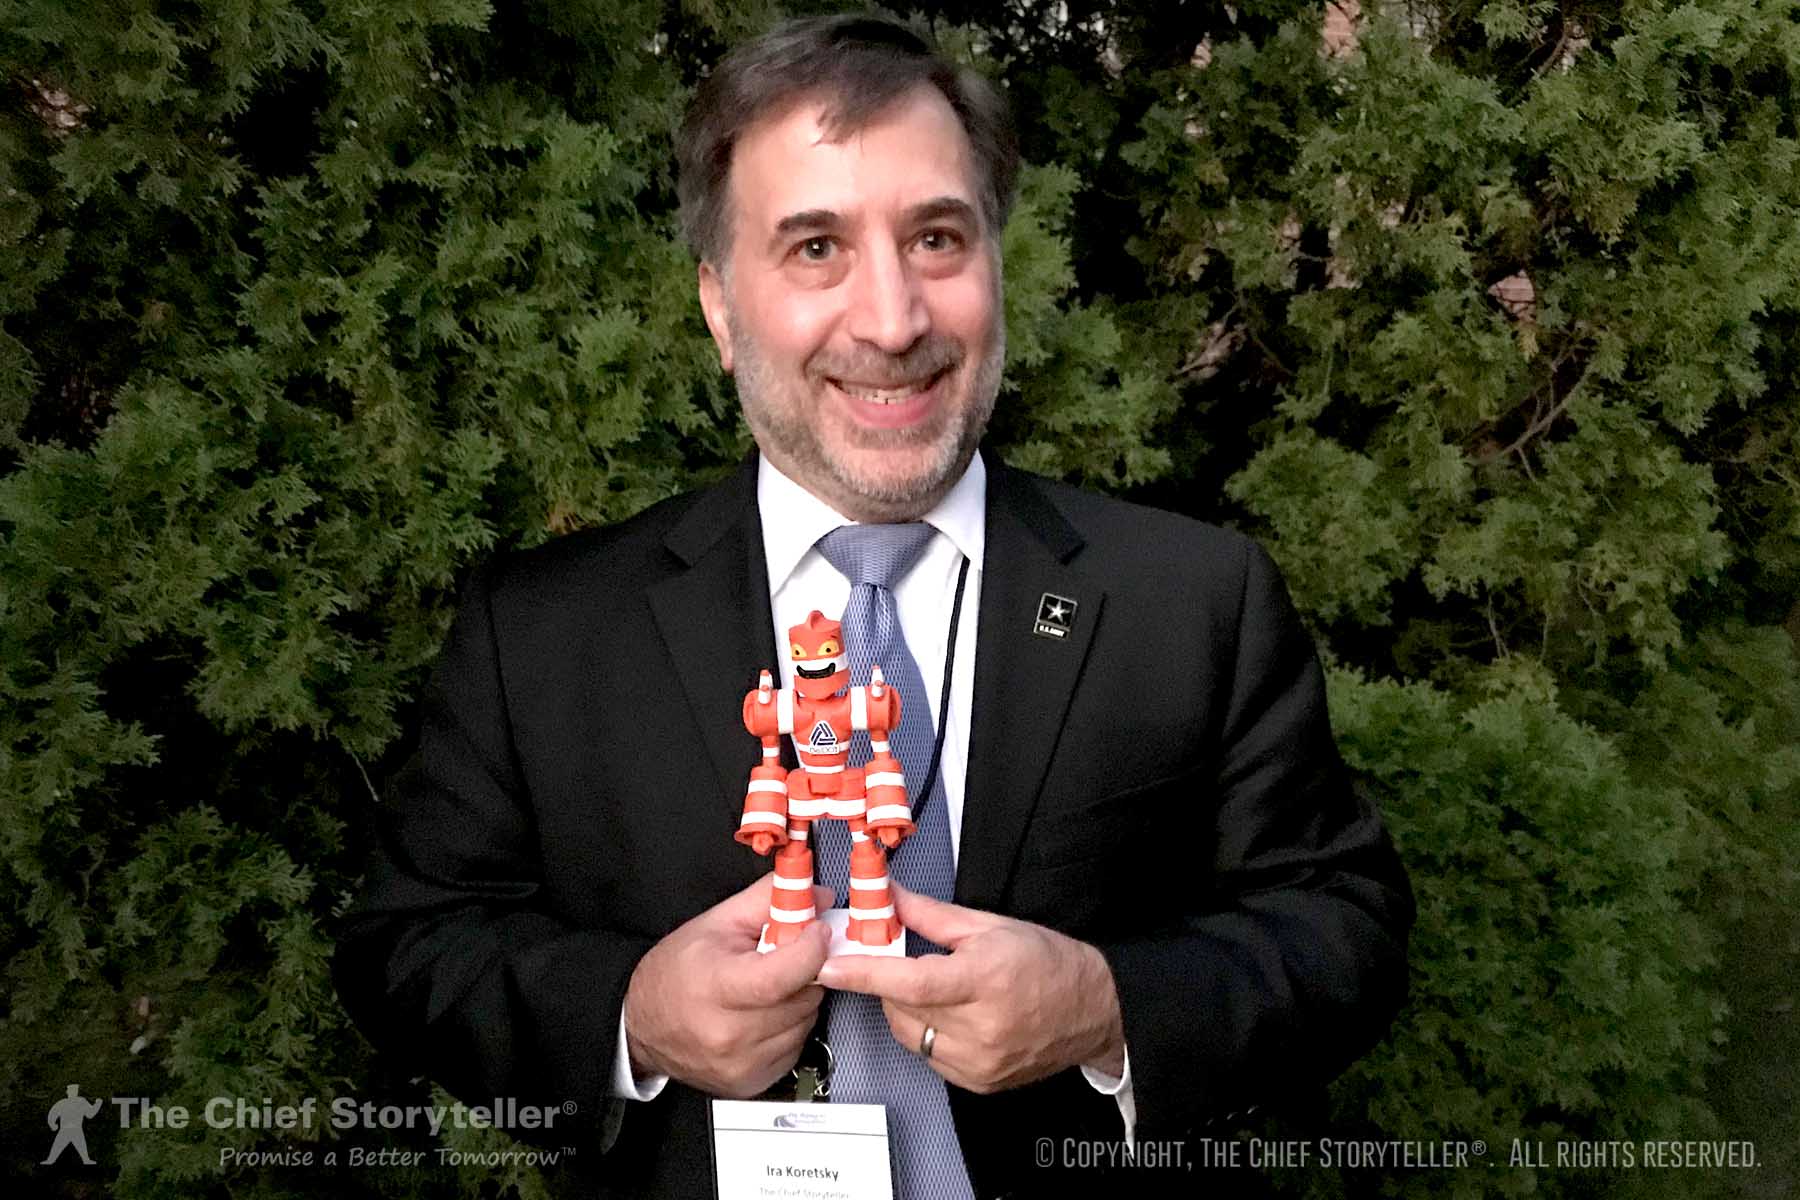 Ira Koretsky holding Wally the Work Zone Warrior, a 7" figurine, from the Secretary of Transportation of Delaware - example of a symbol